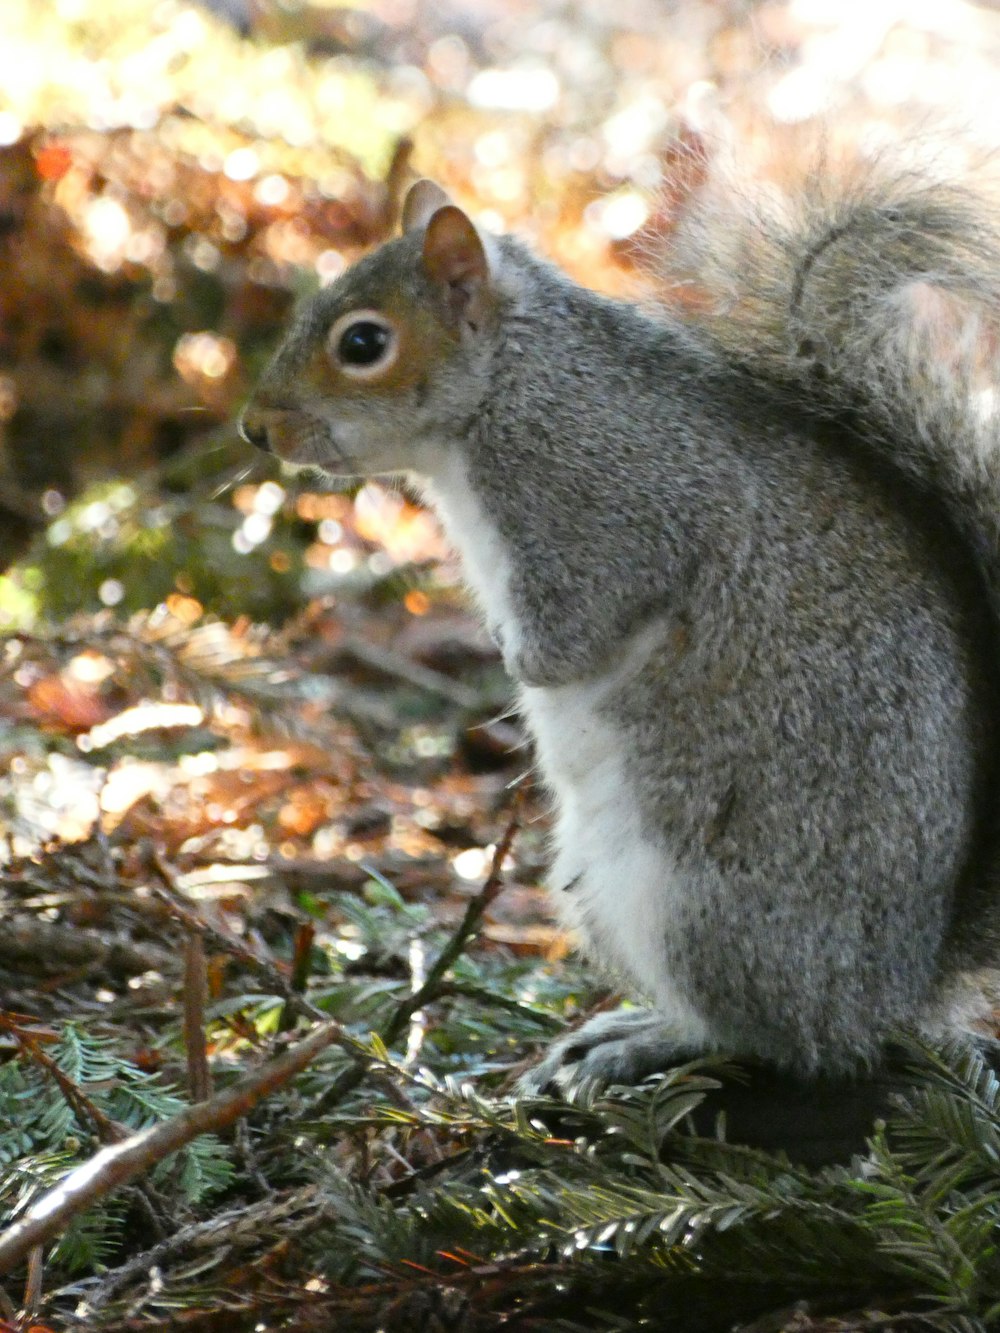 a squirrel with its mouth open